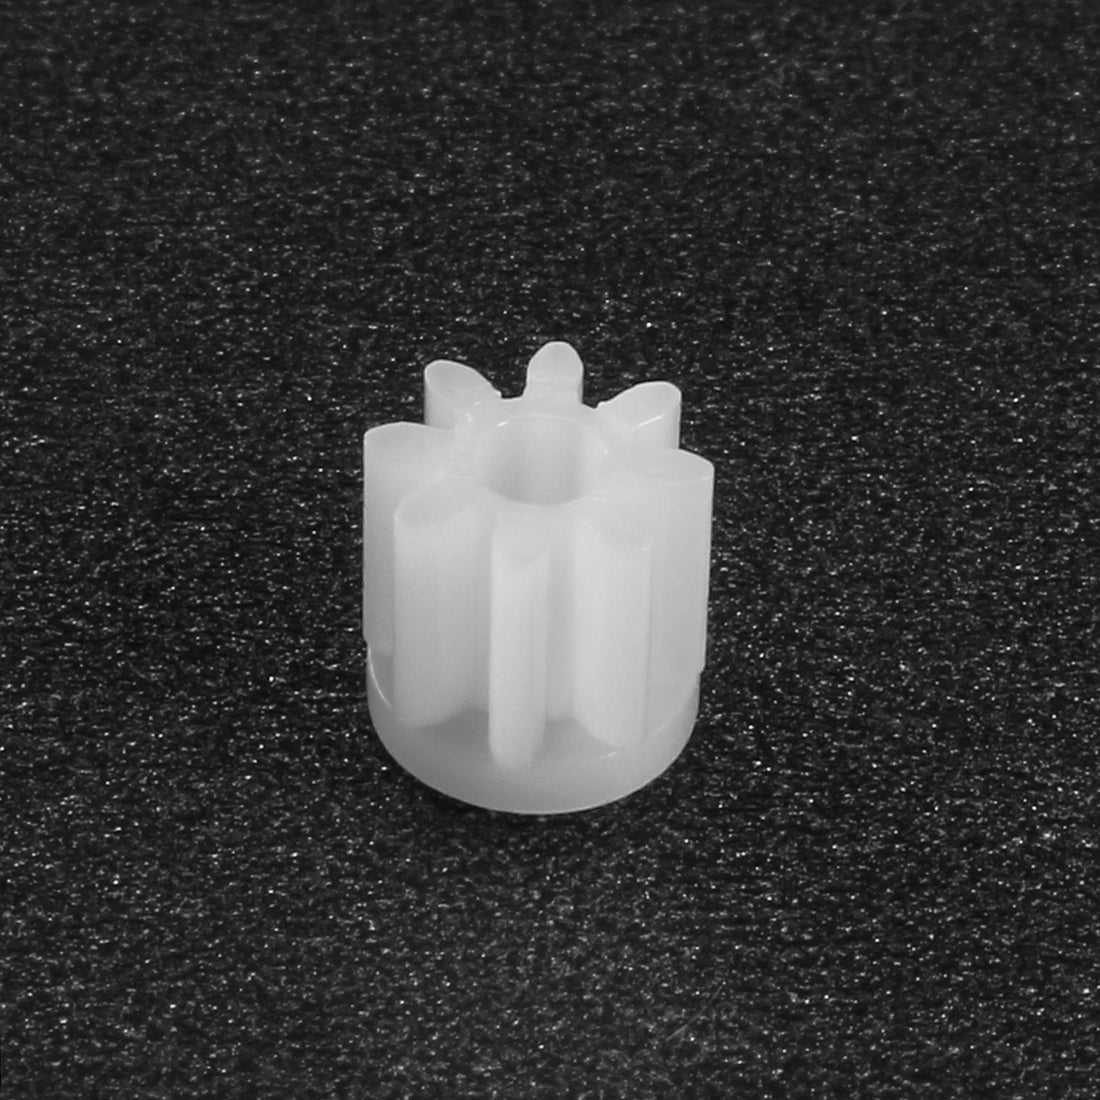 uxcell Uxcell 20Pcs 082A Plastic Gear Accessories with 8Teeth for DIY Car Robot Motor